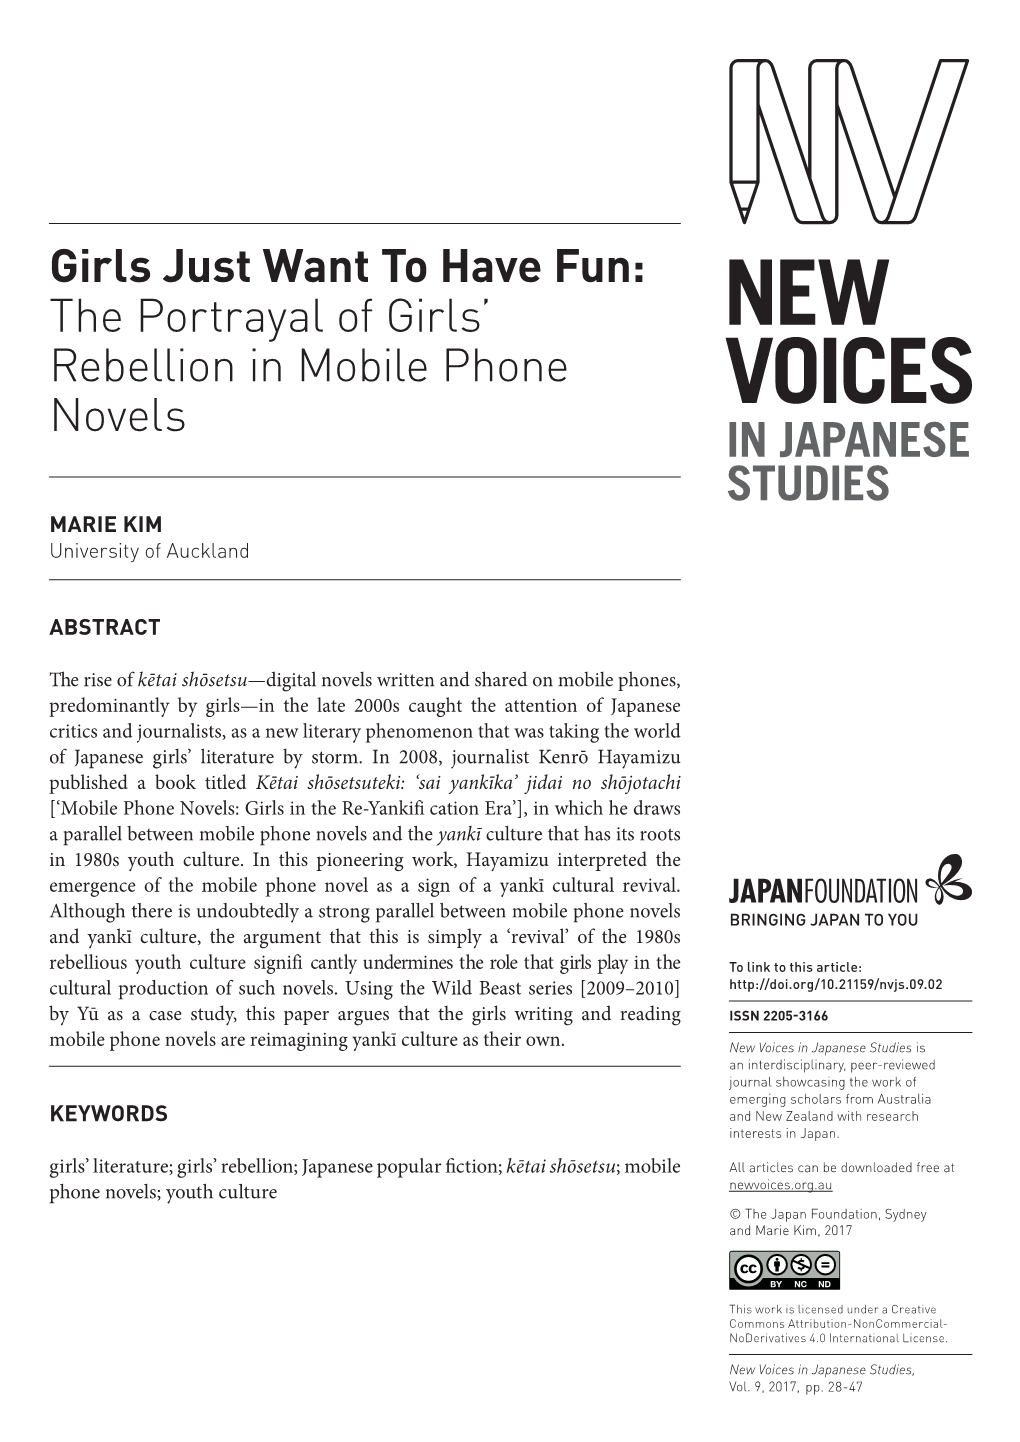 Downloaded Free at Phone Novels; Youth Culture Newvoices.Org.Au © the Japan Foundation, Sydney and Marie Kim, 2017